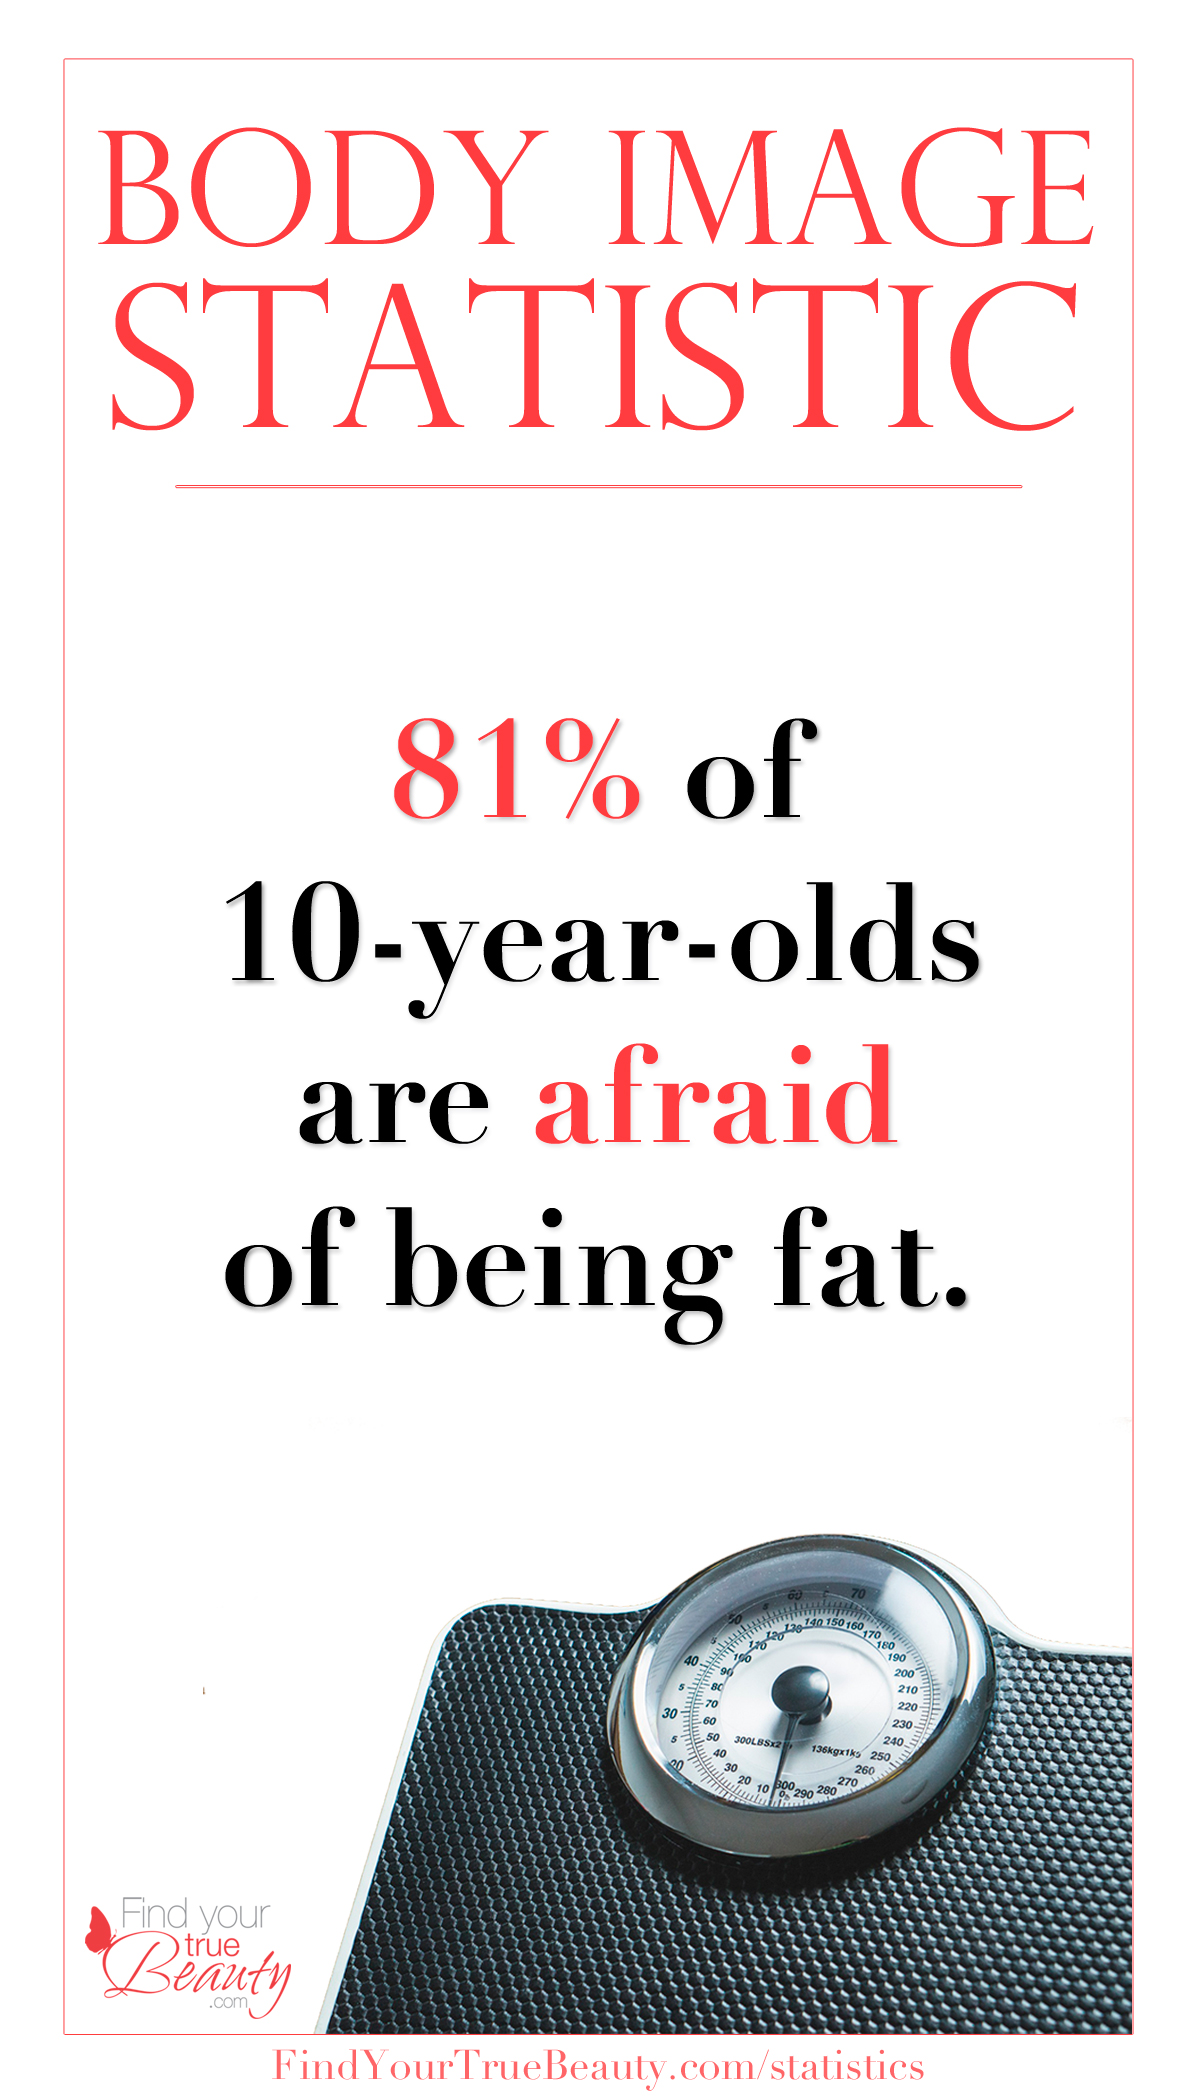 Body Image Statistic: 81% of 10-year-olds are afraid of being fat.